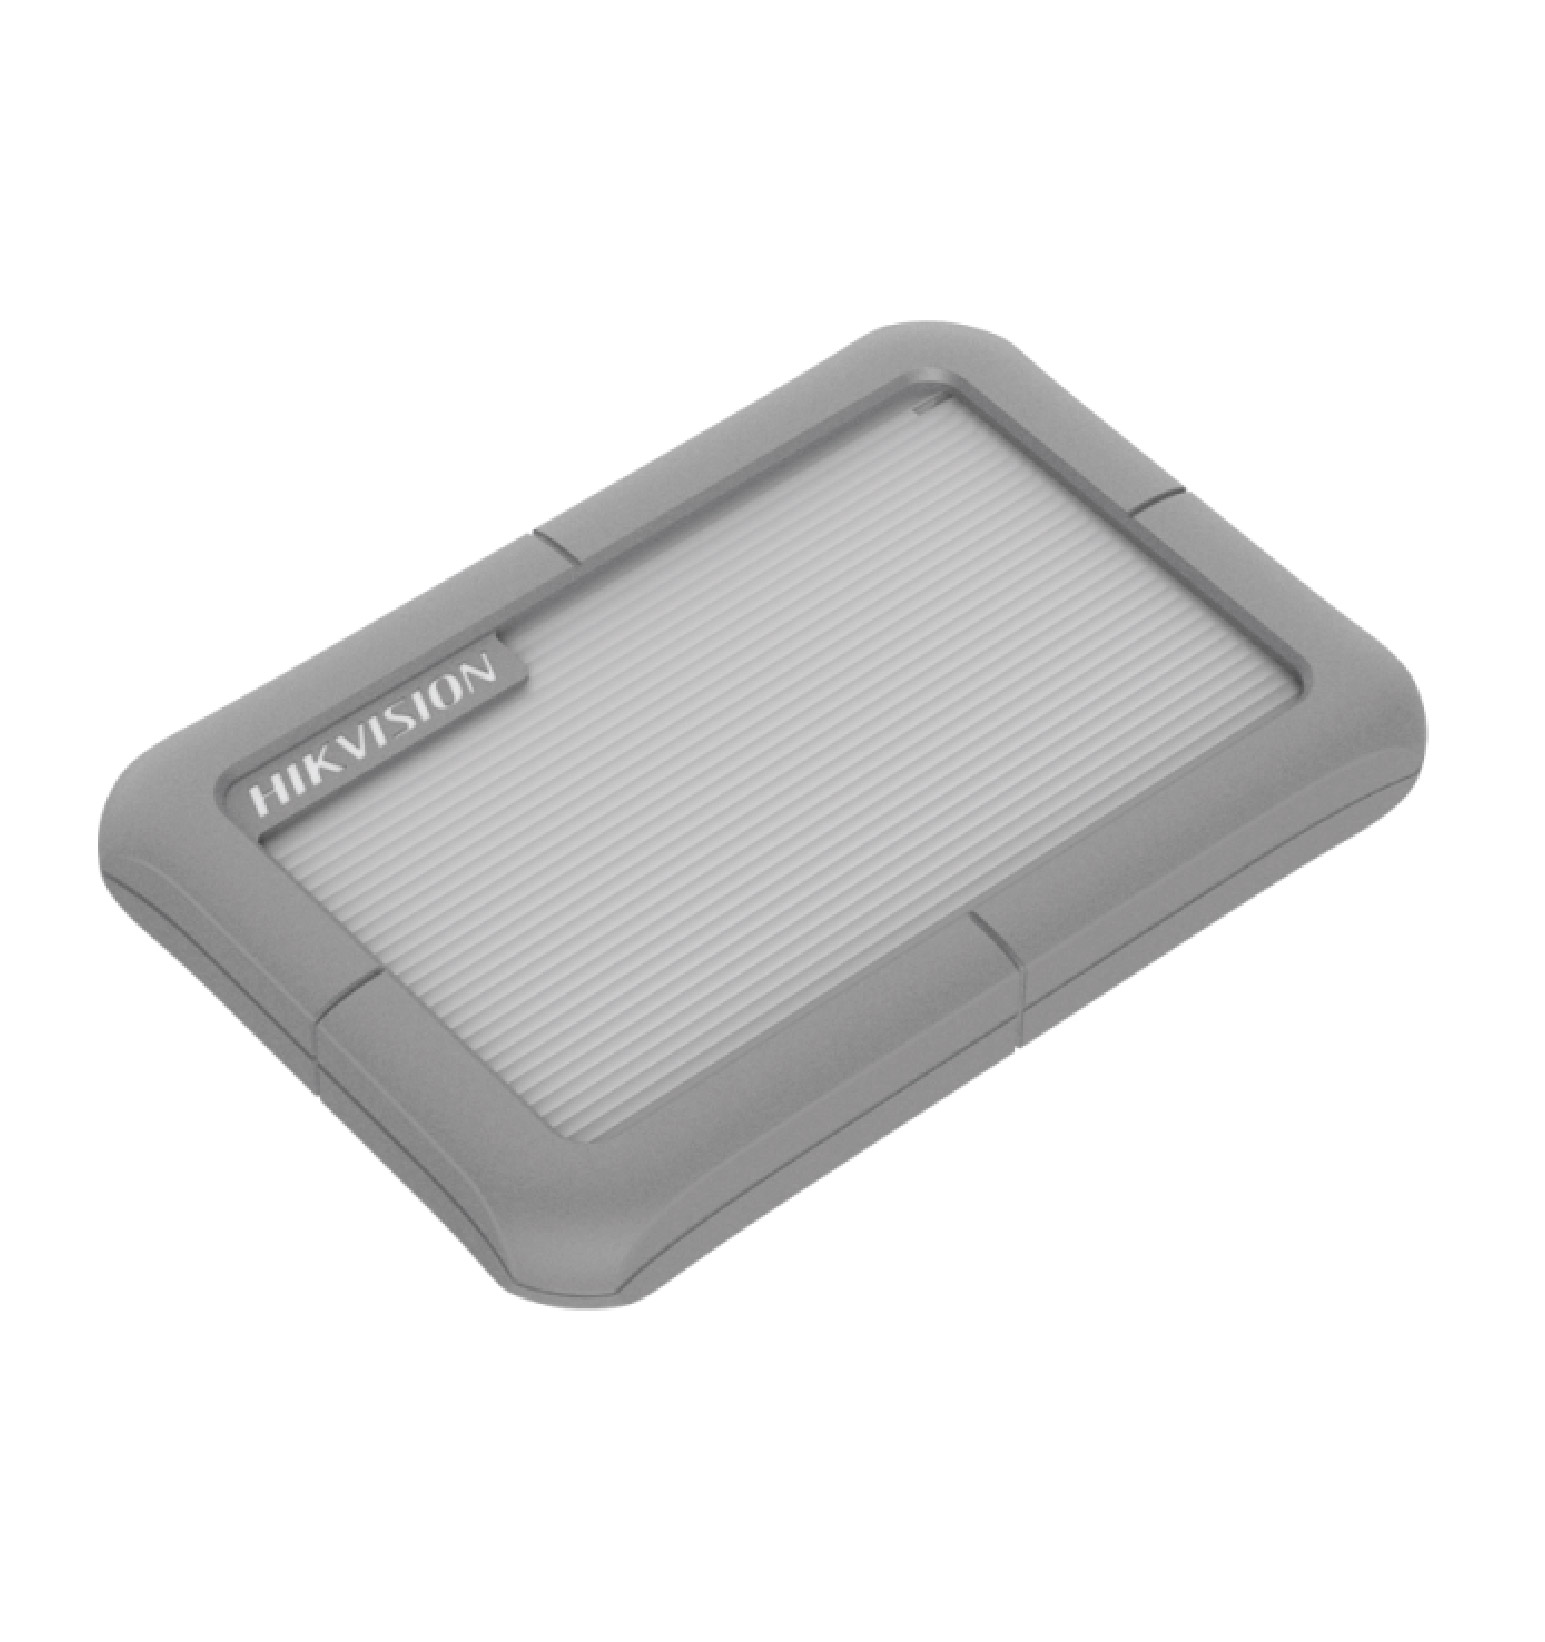 HIKVISION T30-1TB-GY Portable HDD